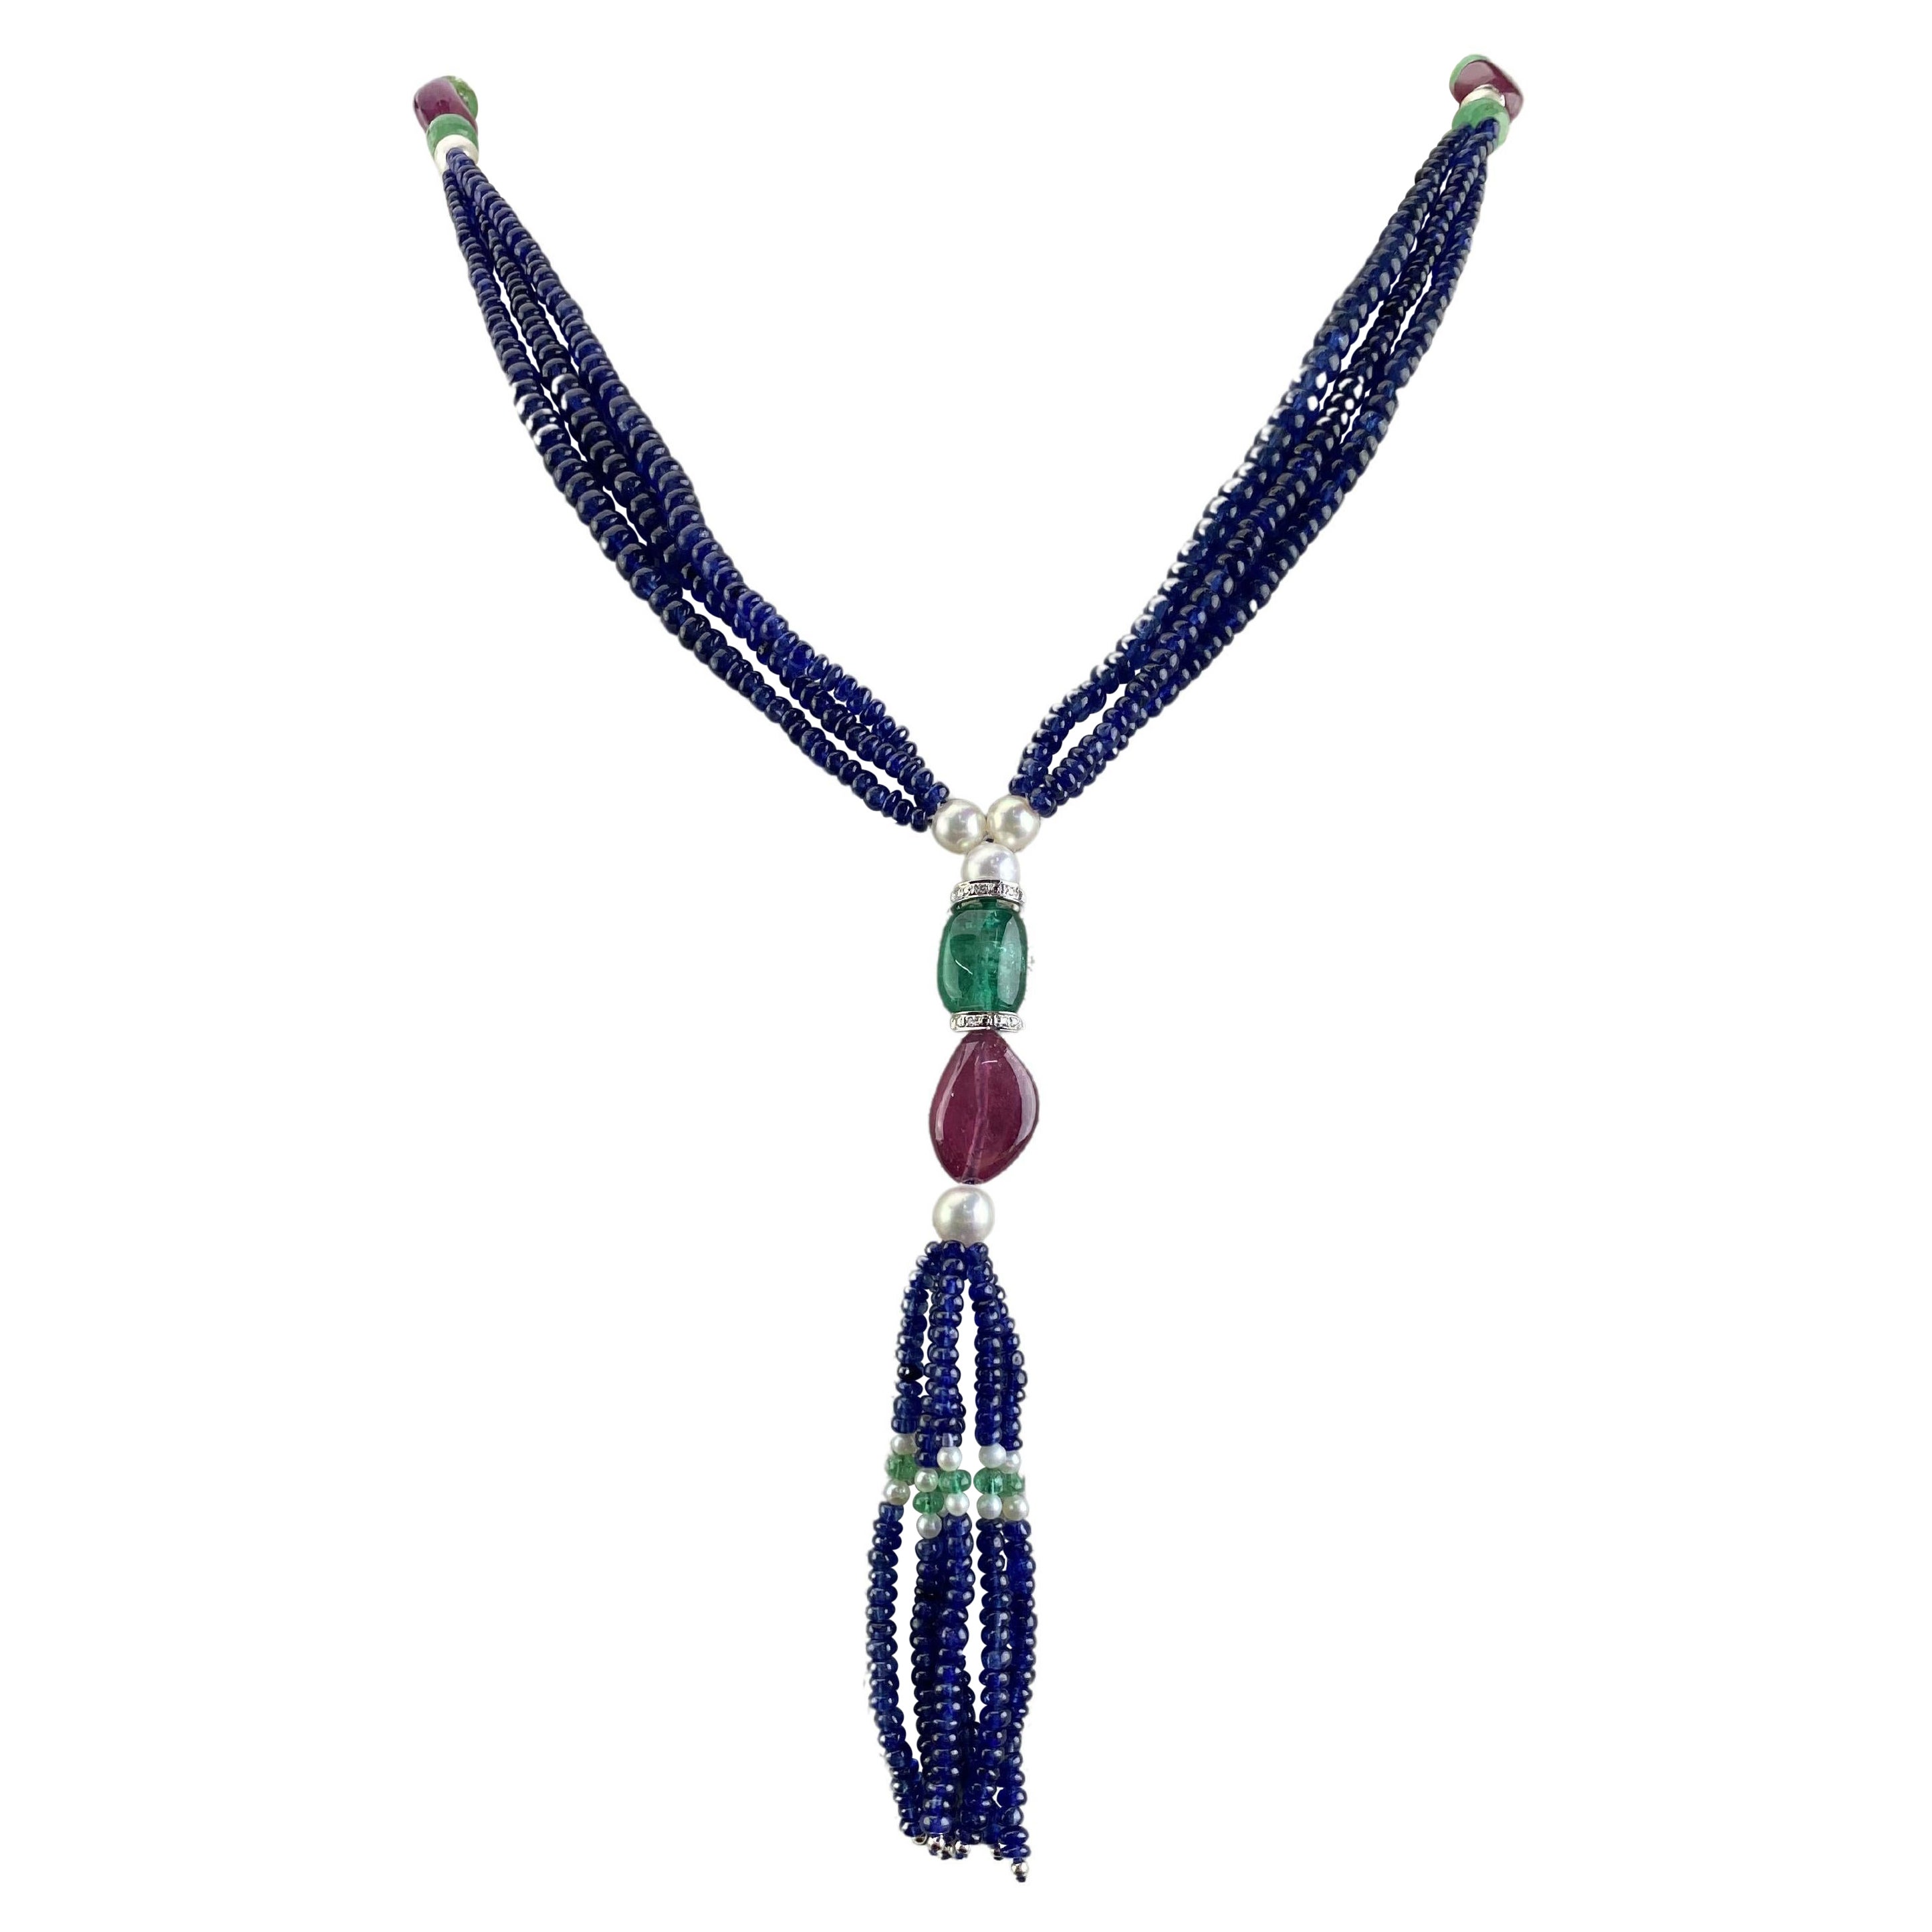 Blue Sapphire, Ruby, Emerald and Pearl Multi Strand Beaded Necklace